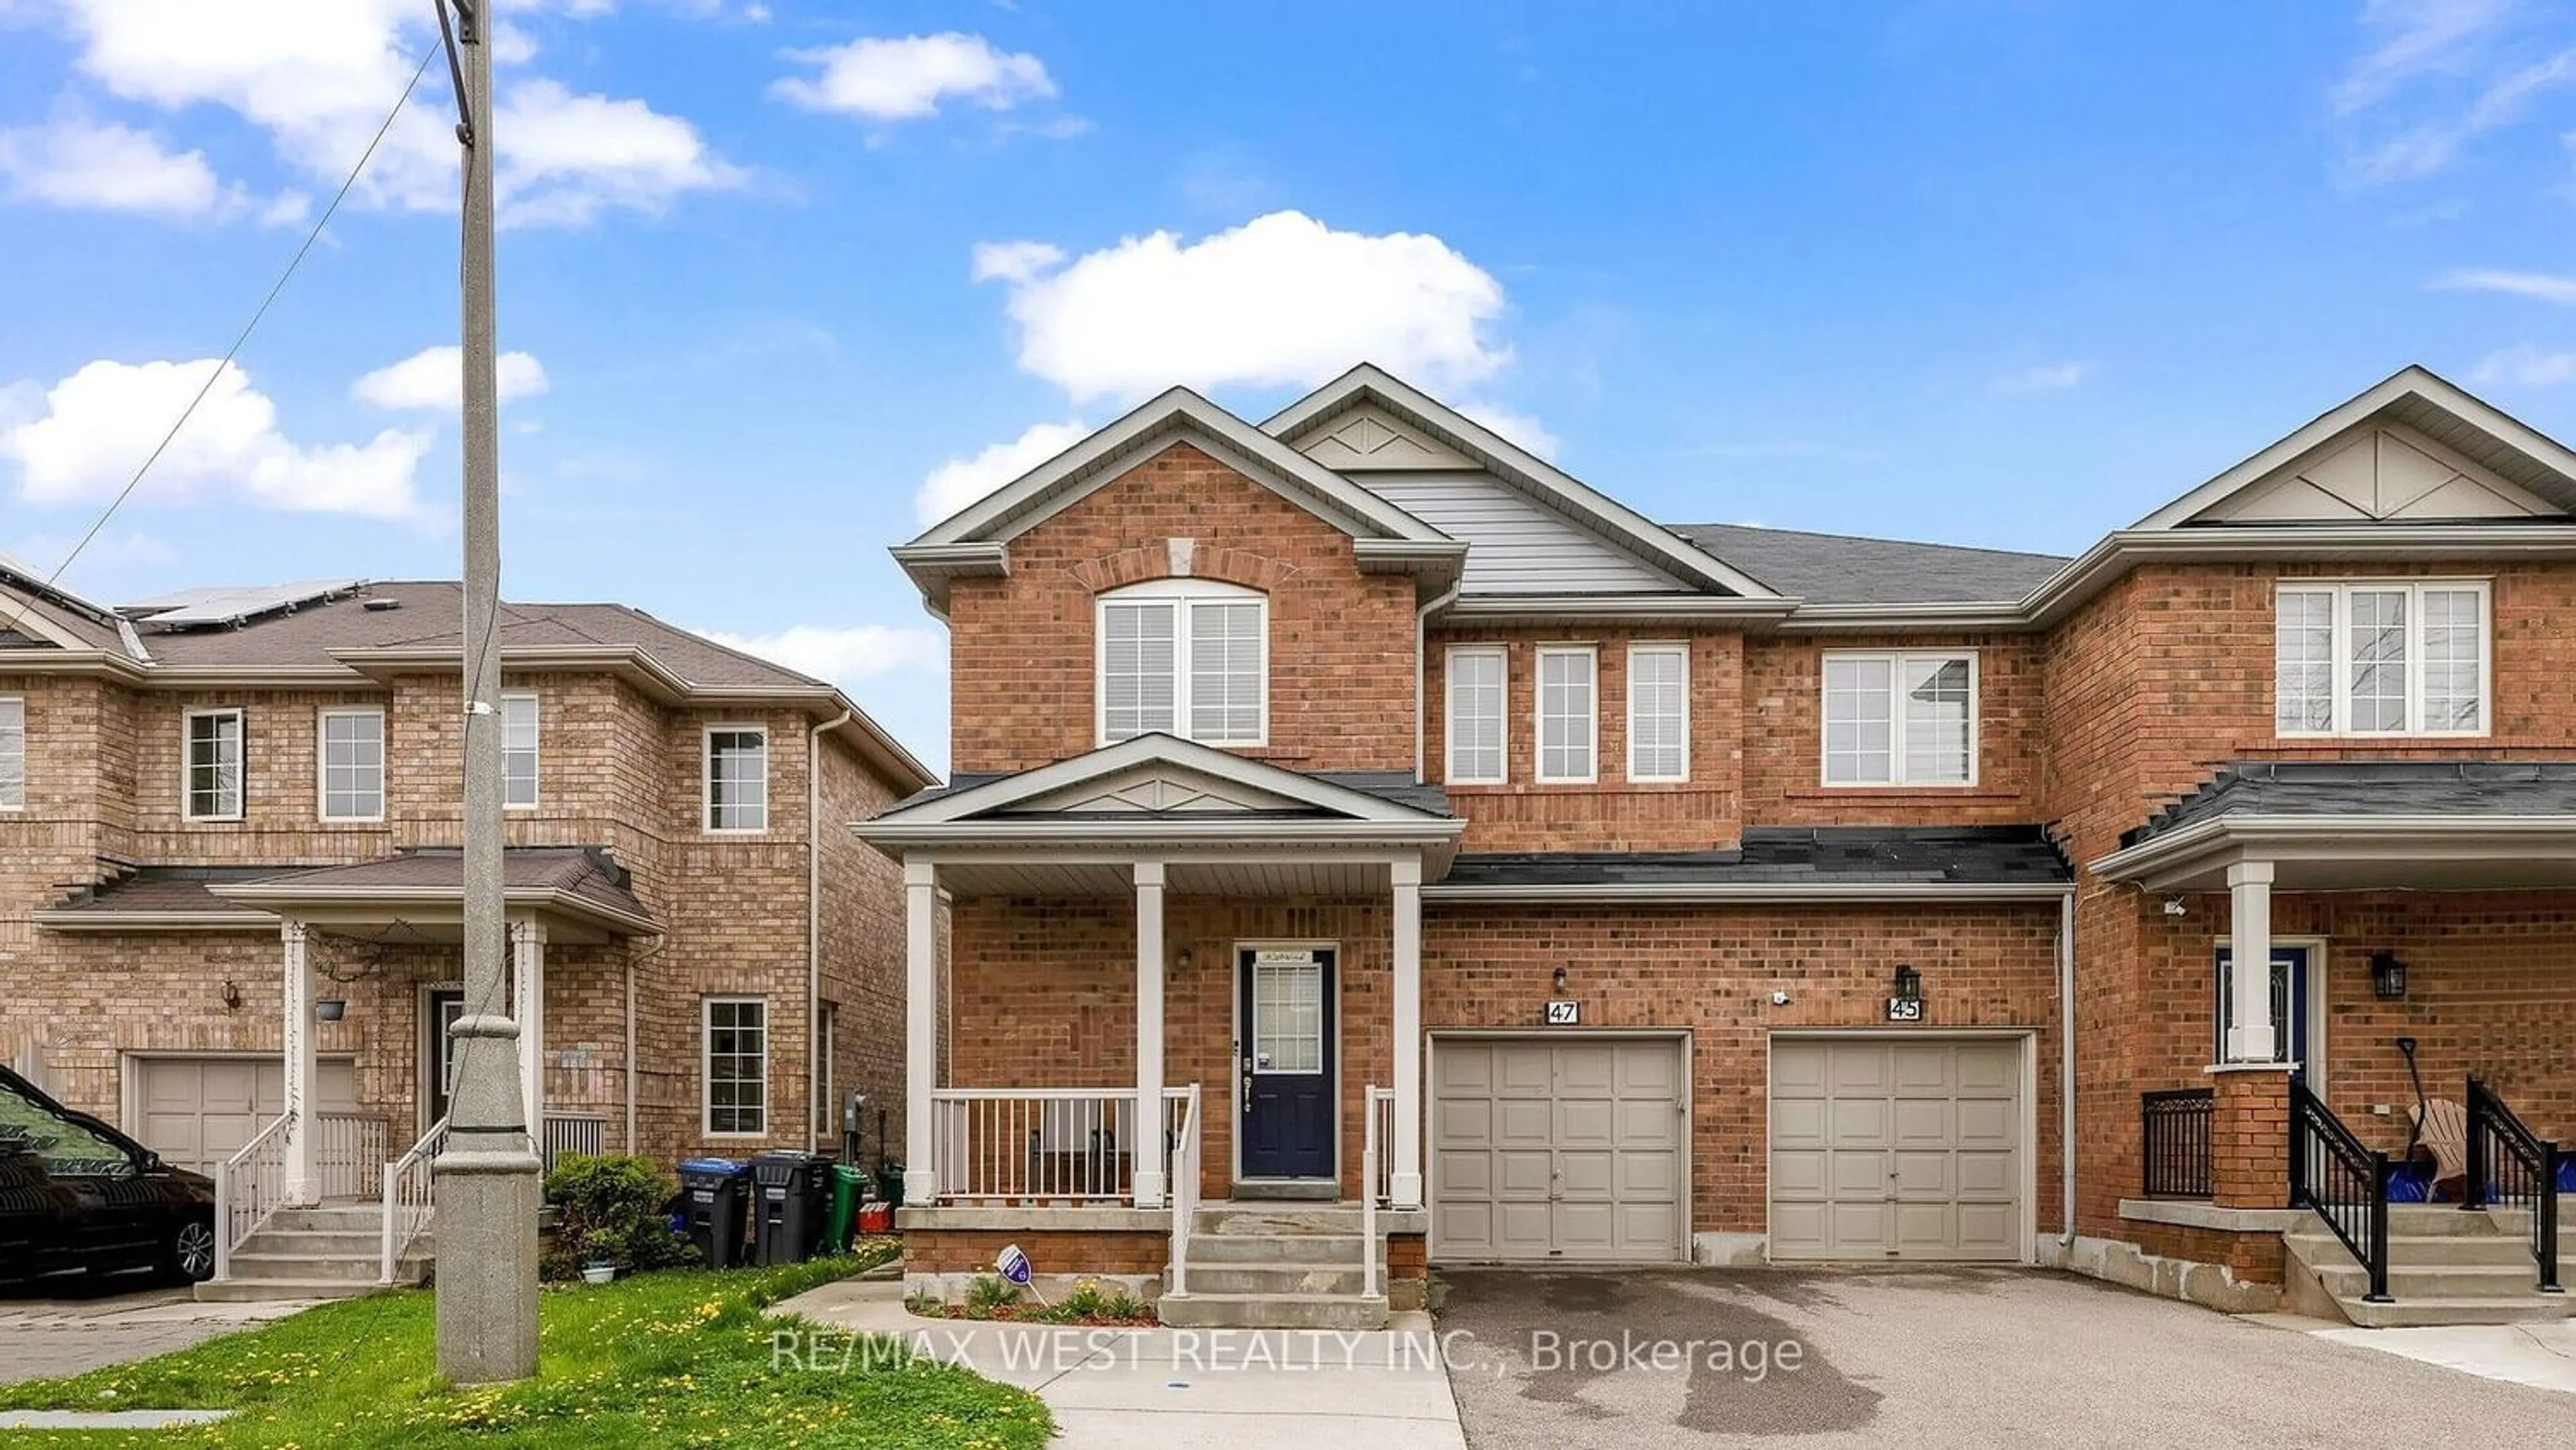 Home with brick exterior material for 47 Flurry Circ, Brampton Ontario L6X 0S7